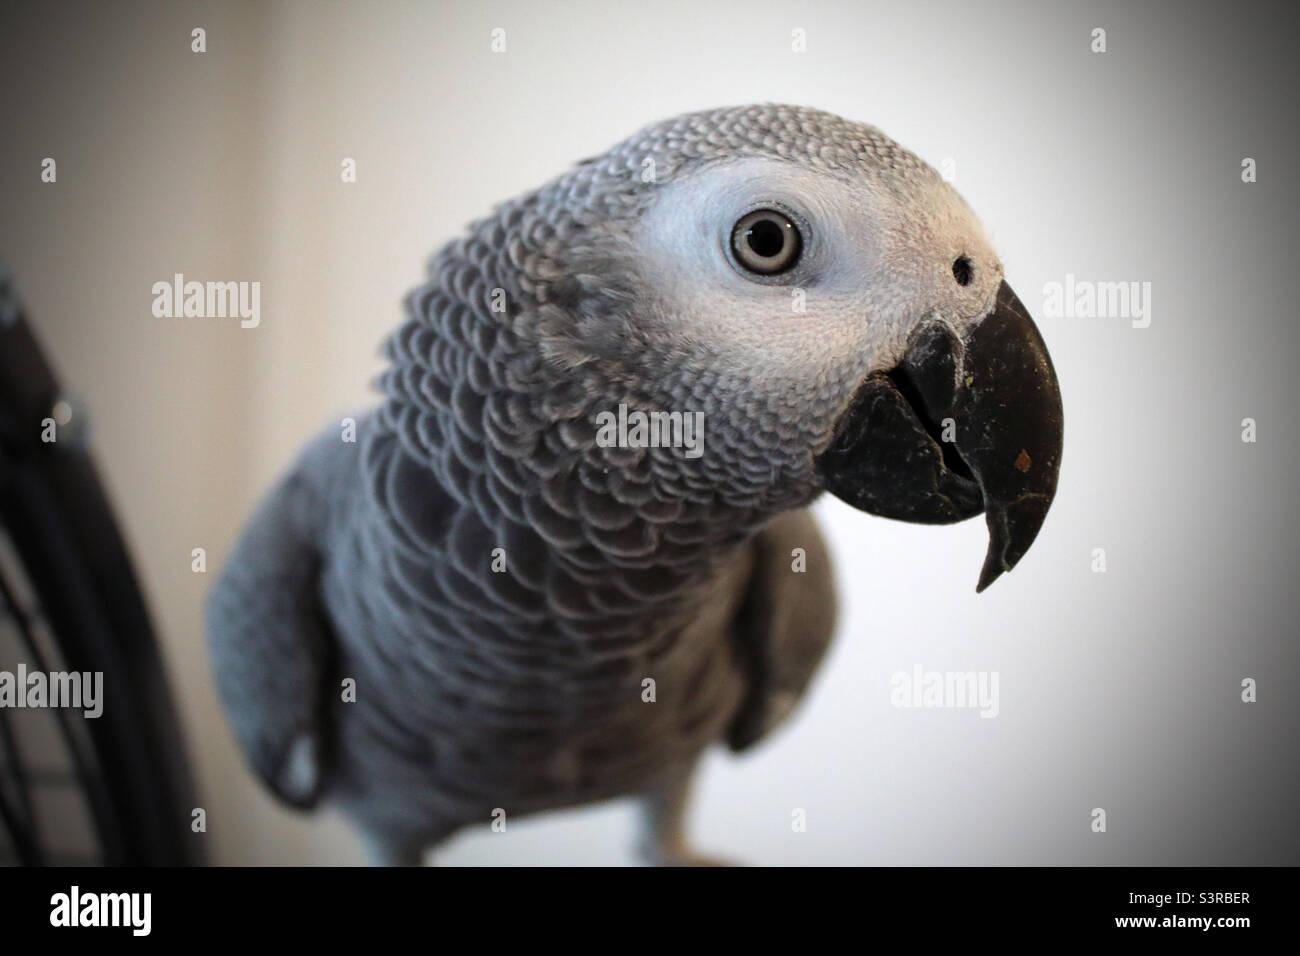 A Baby African Grey Parrot looking directly at the camera. The parrot is a  red tail Congo type bird Stock Photo - Alamy